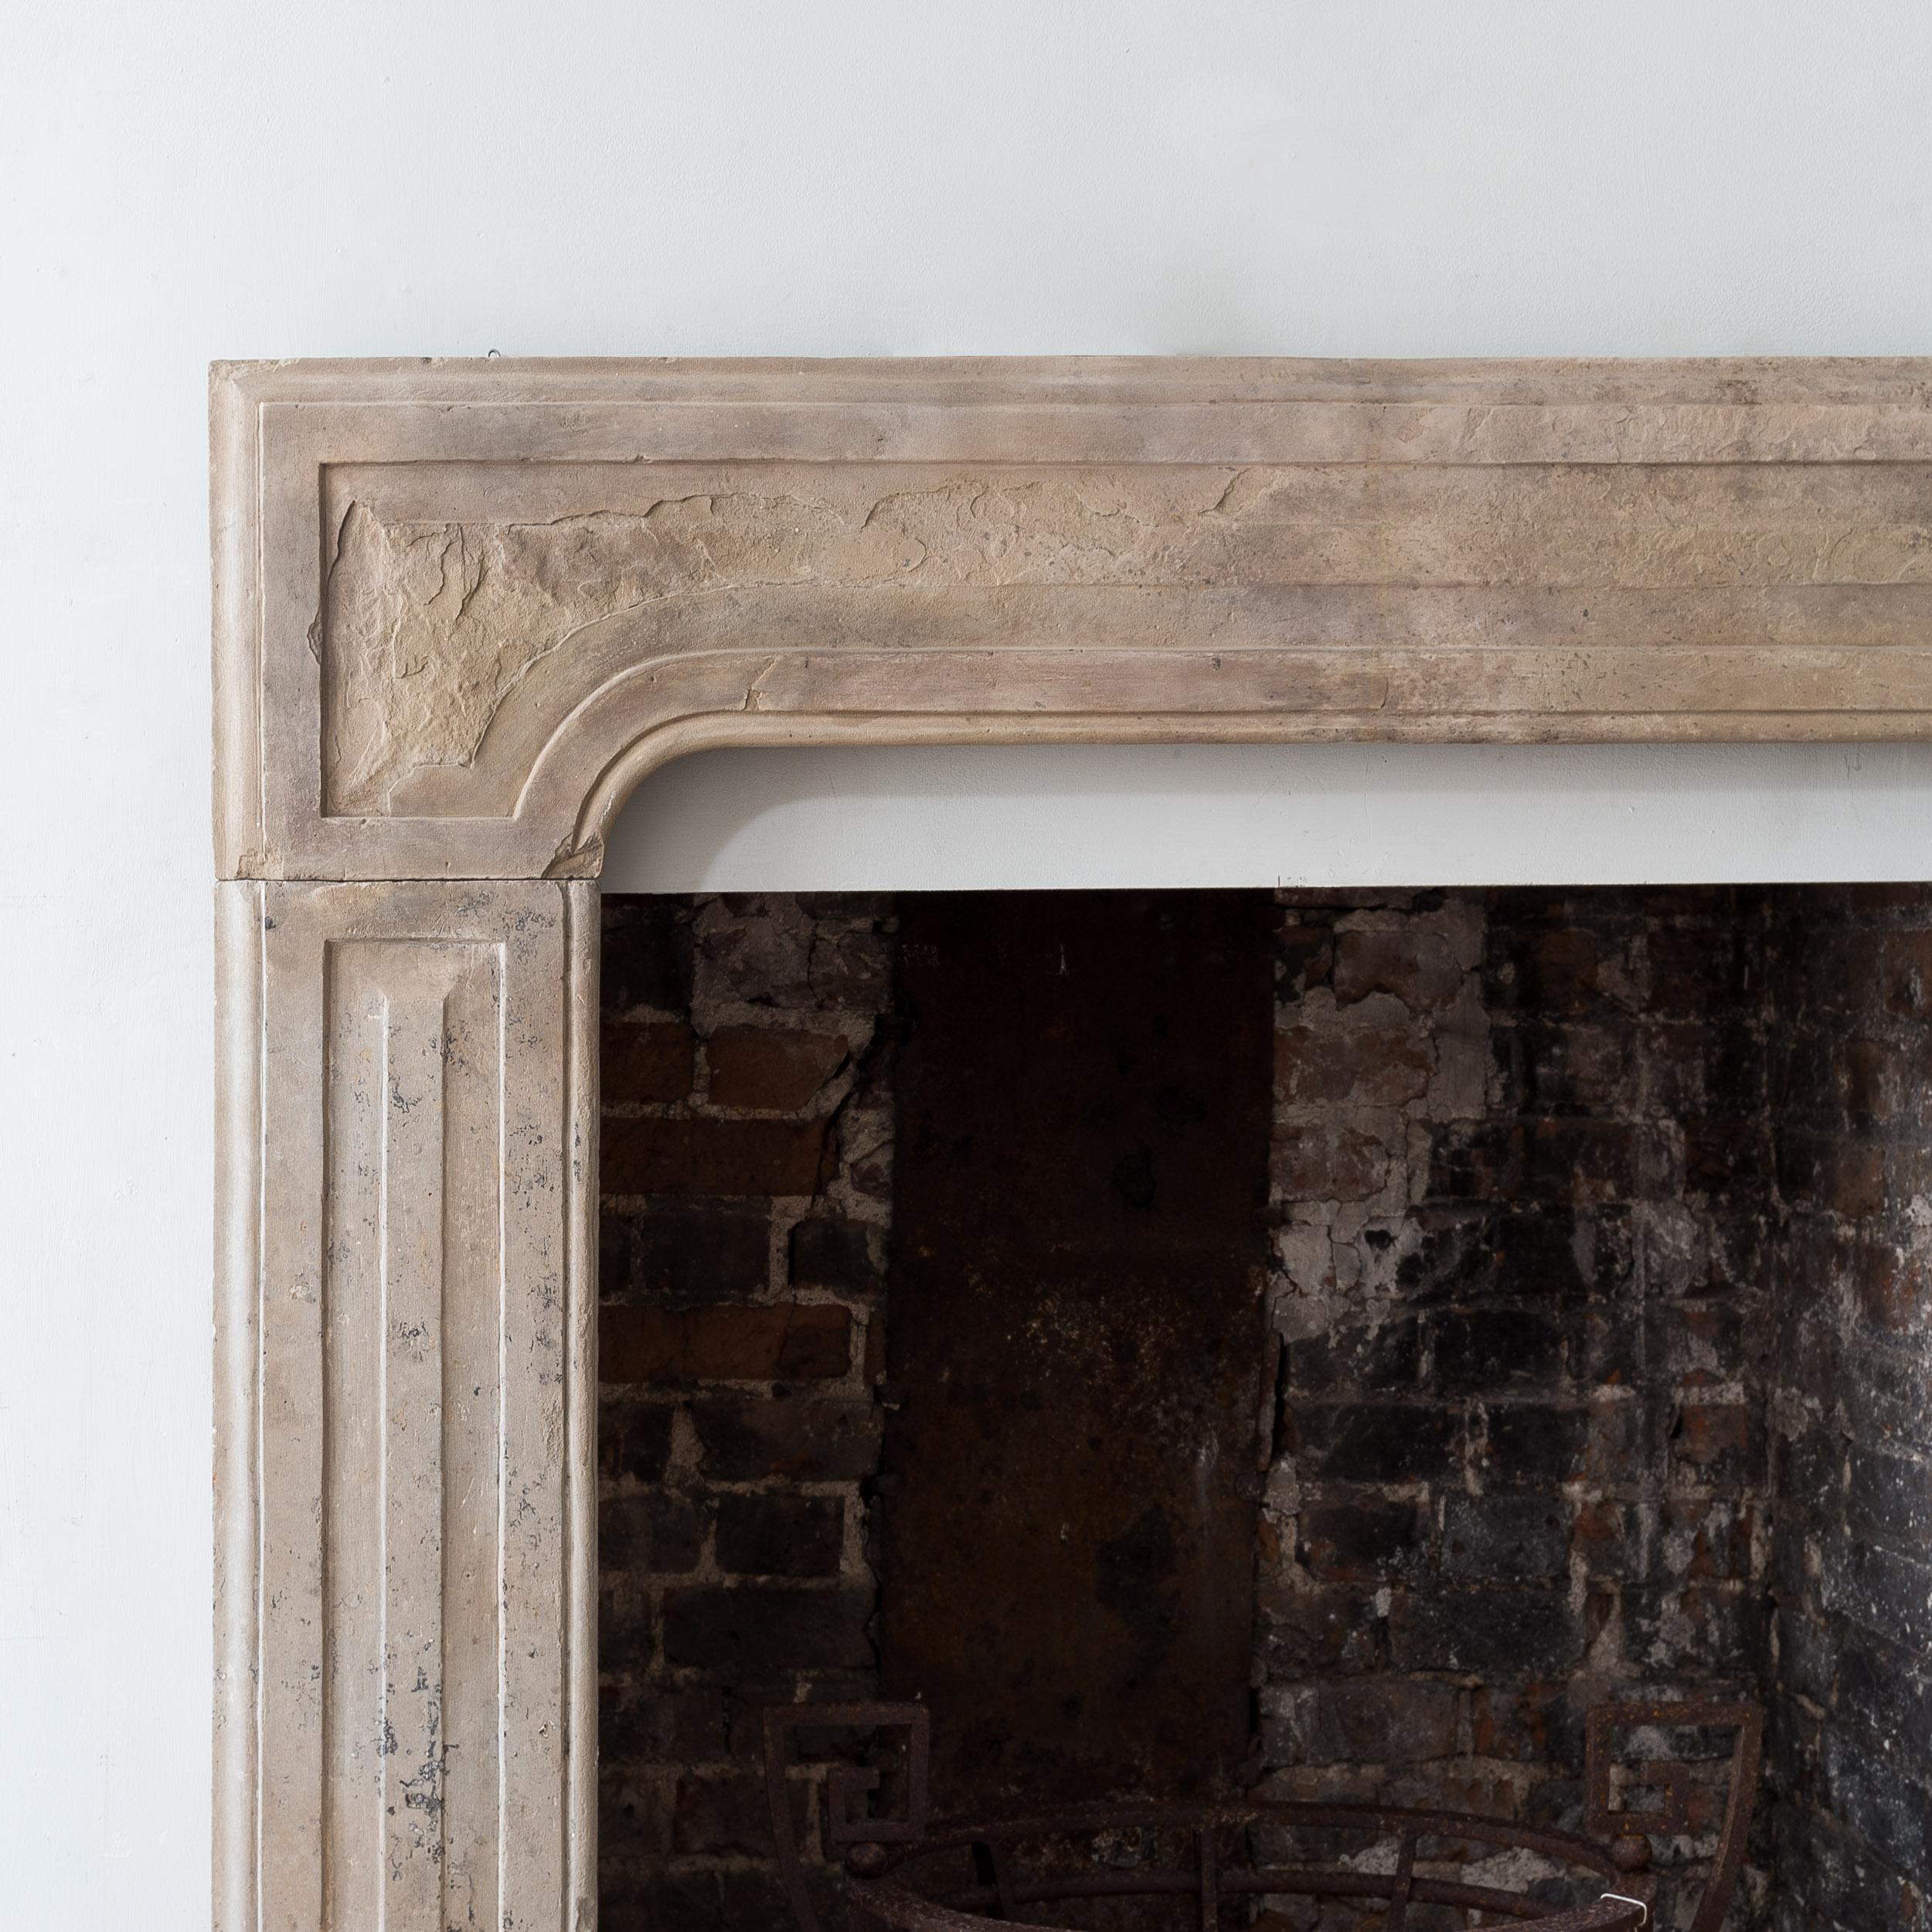 A George I Yorkstone chimneypiece, c.1710-1720, the frame surround with conforming raised panels to the frieze and jambs. Restored.